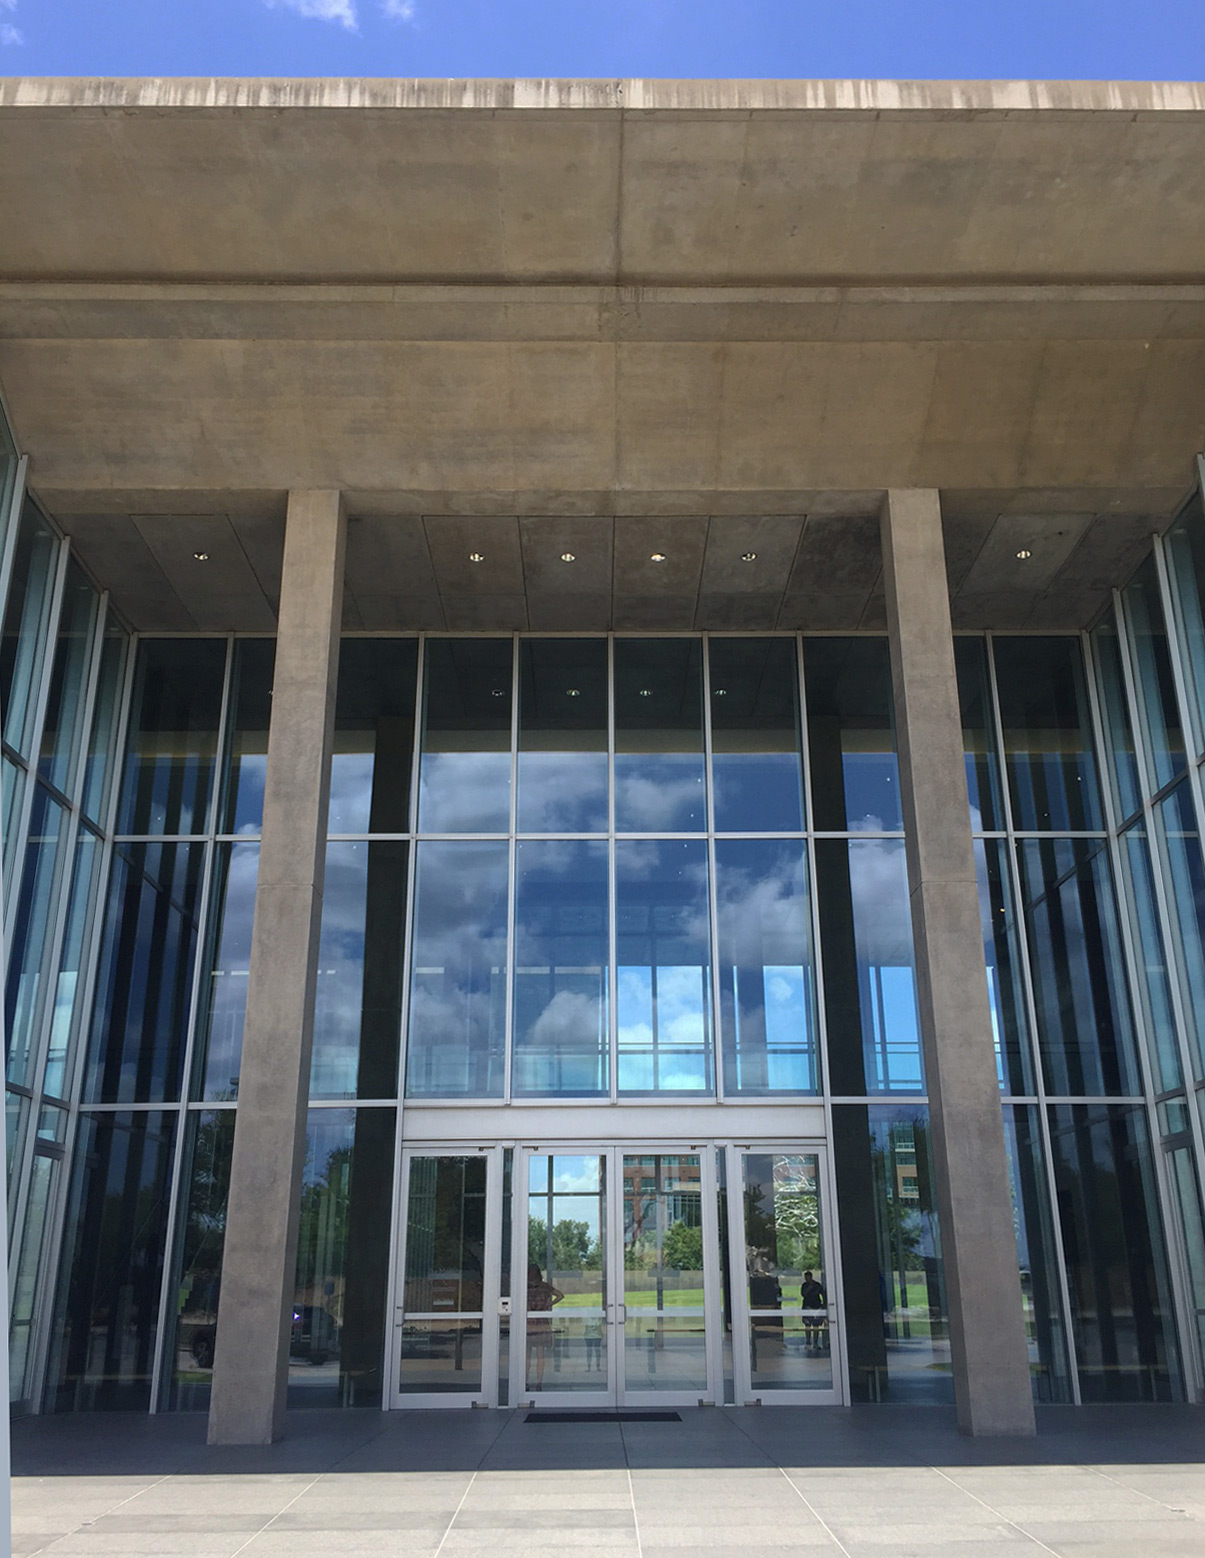 Entry doors of the modern art museum of fort worth wedding venue